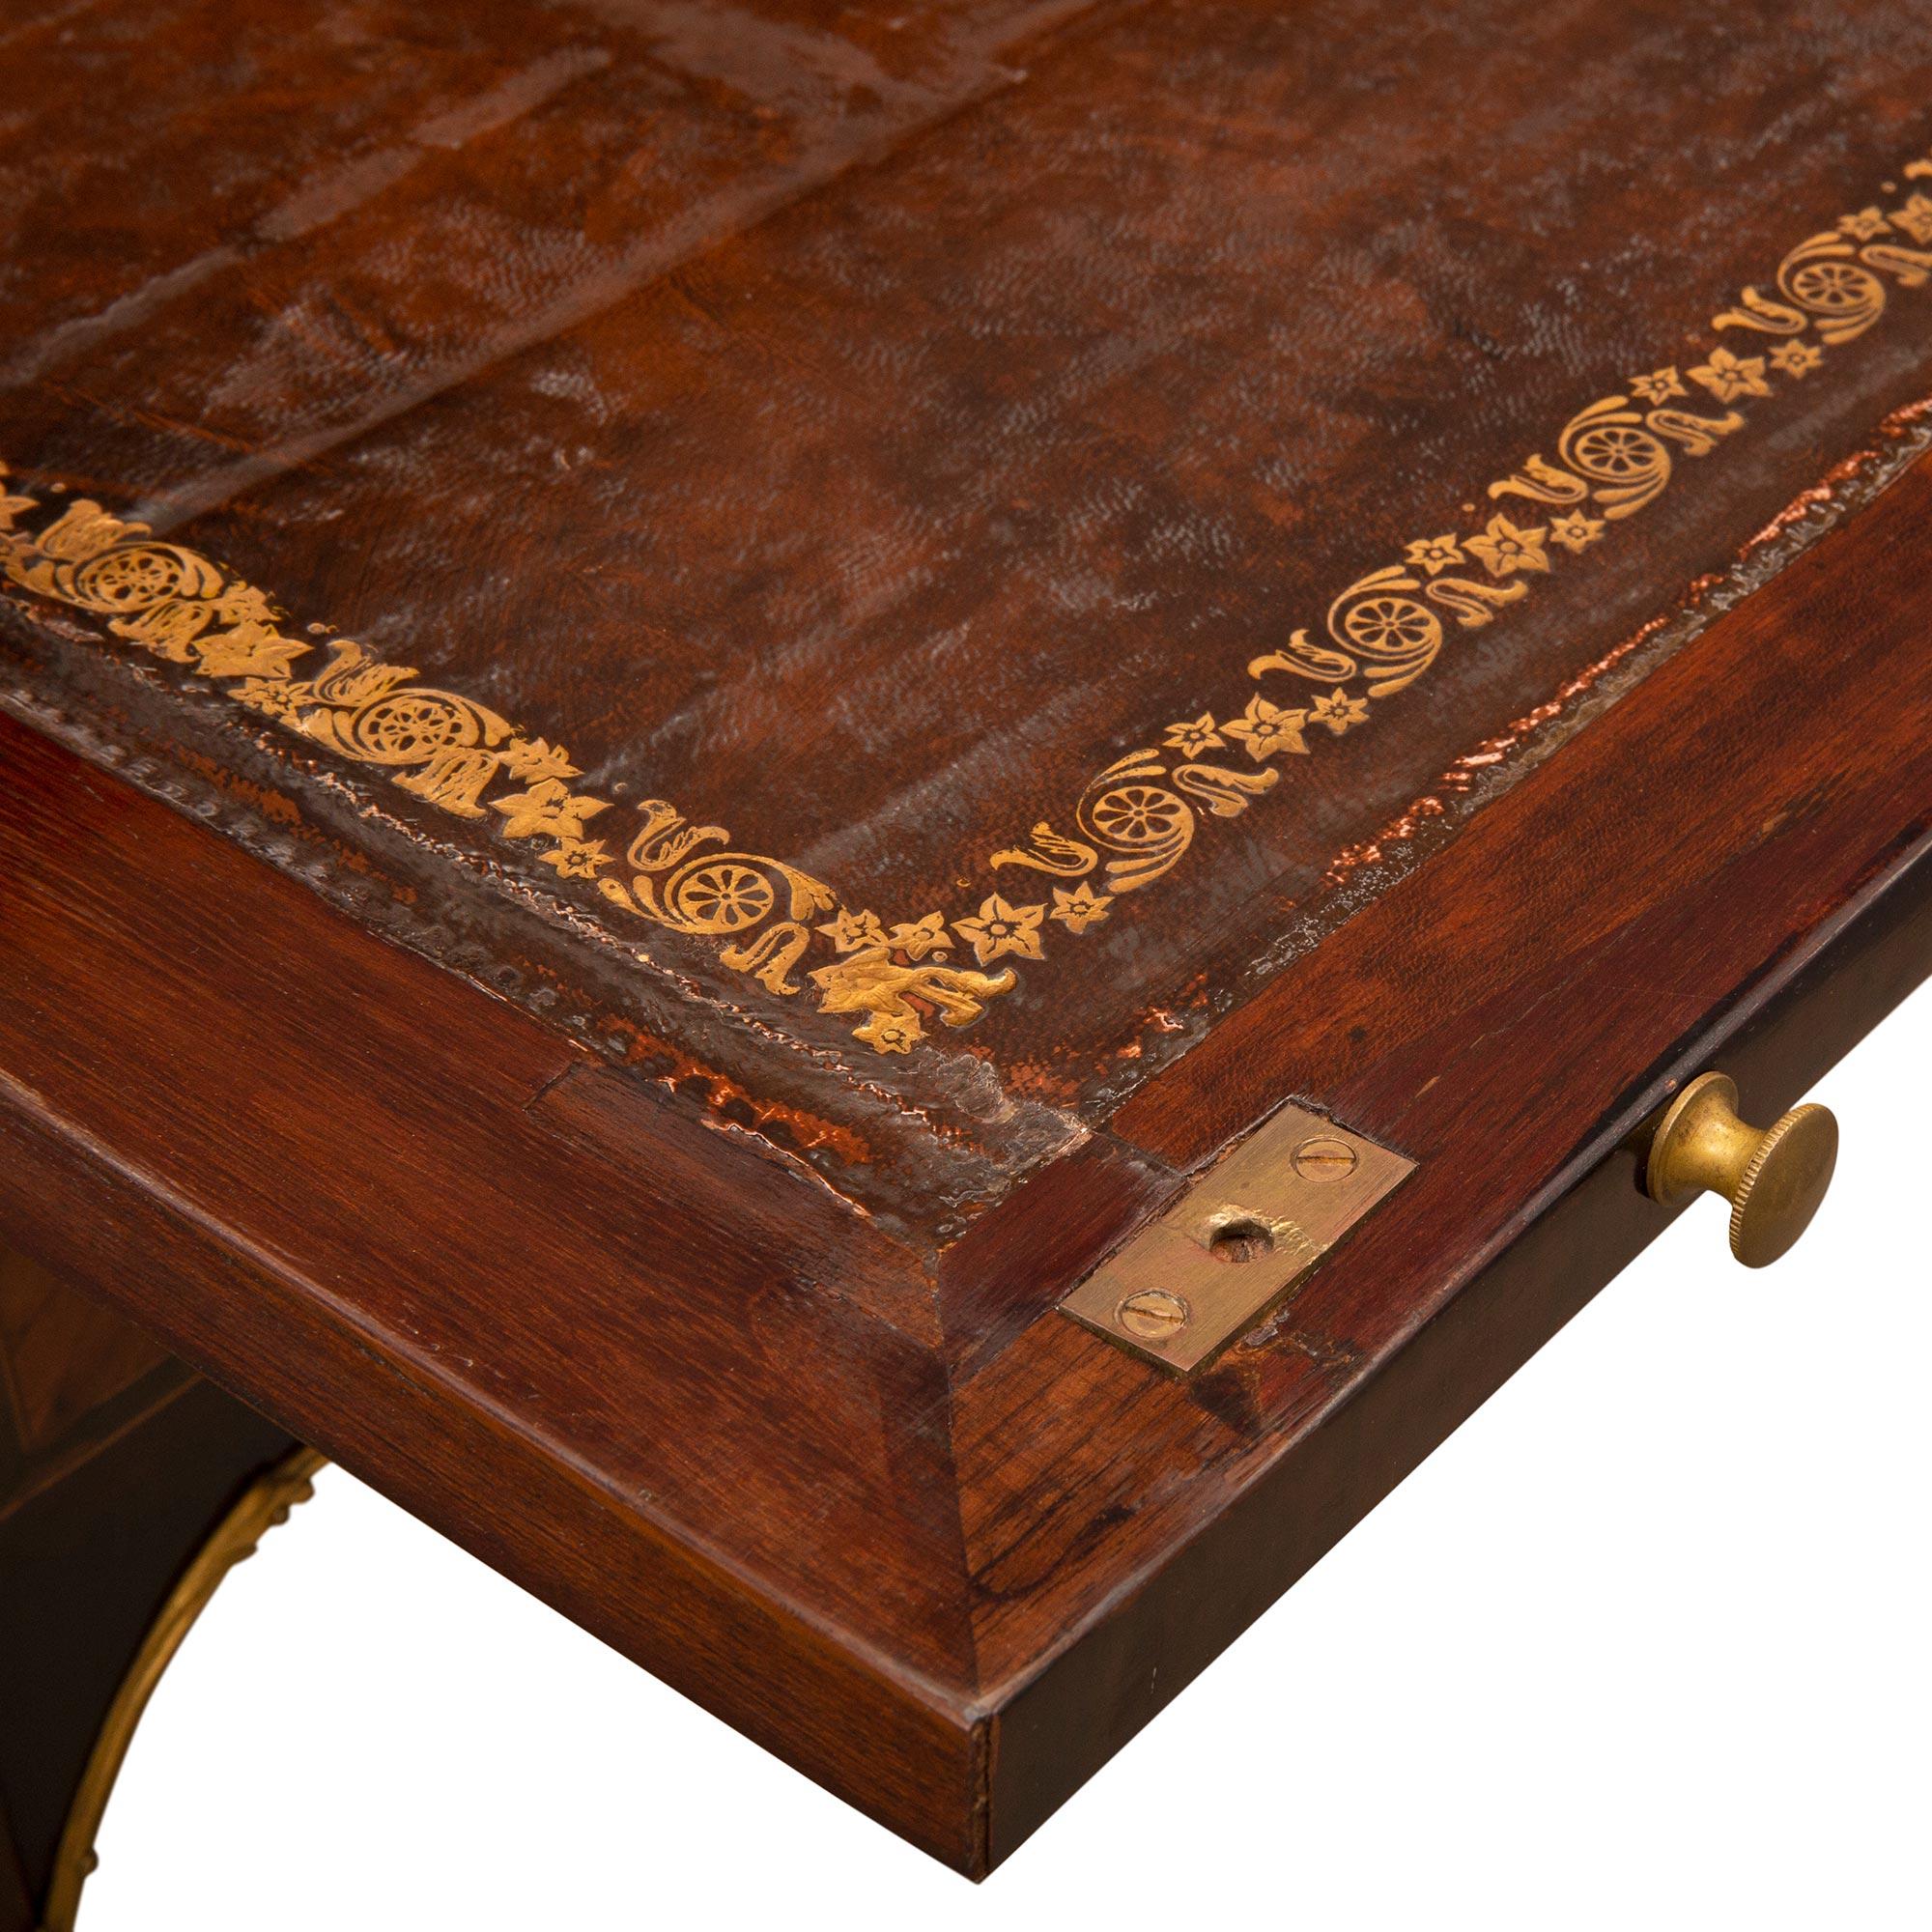 French 18th Century Louis XV Period Kingwood, Tulipwood and Ormolu Desk For Sale 5